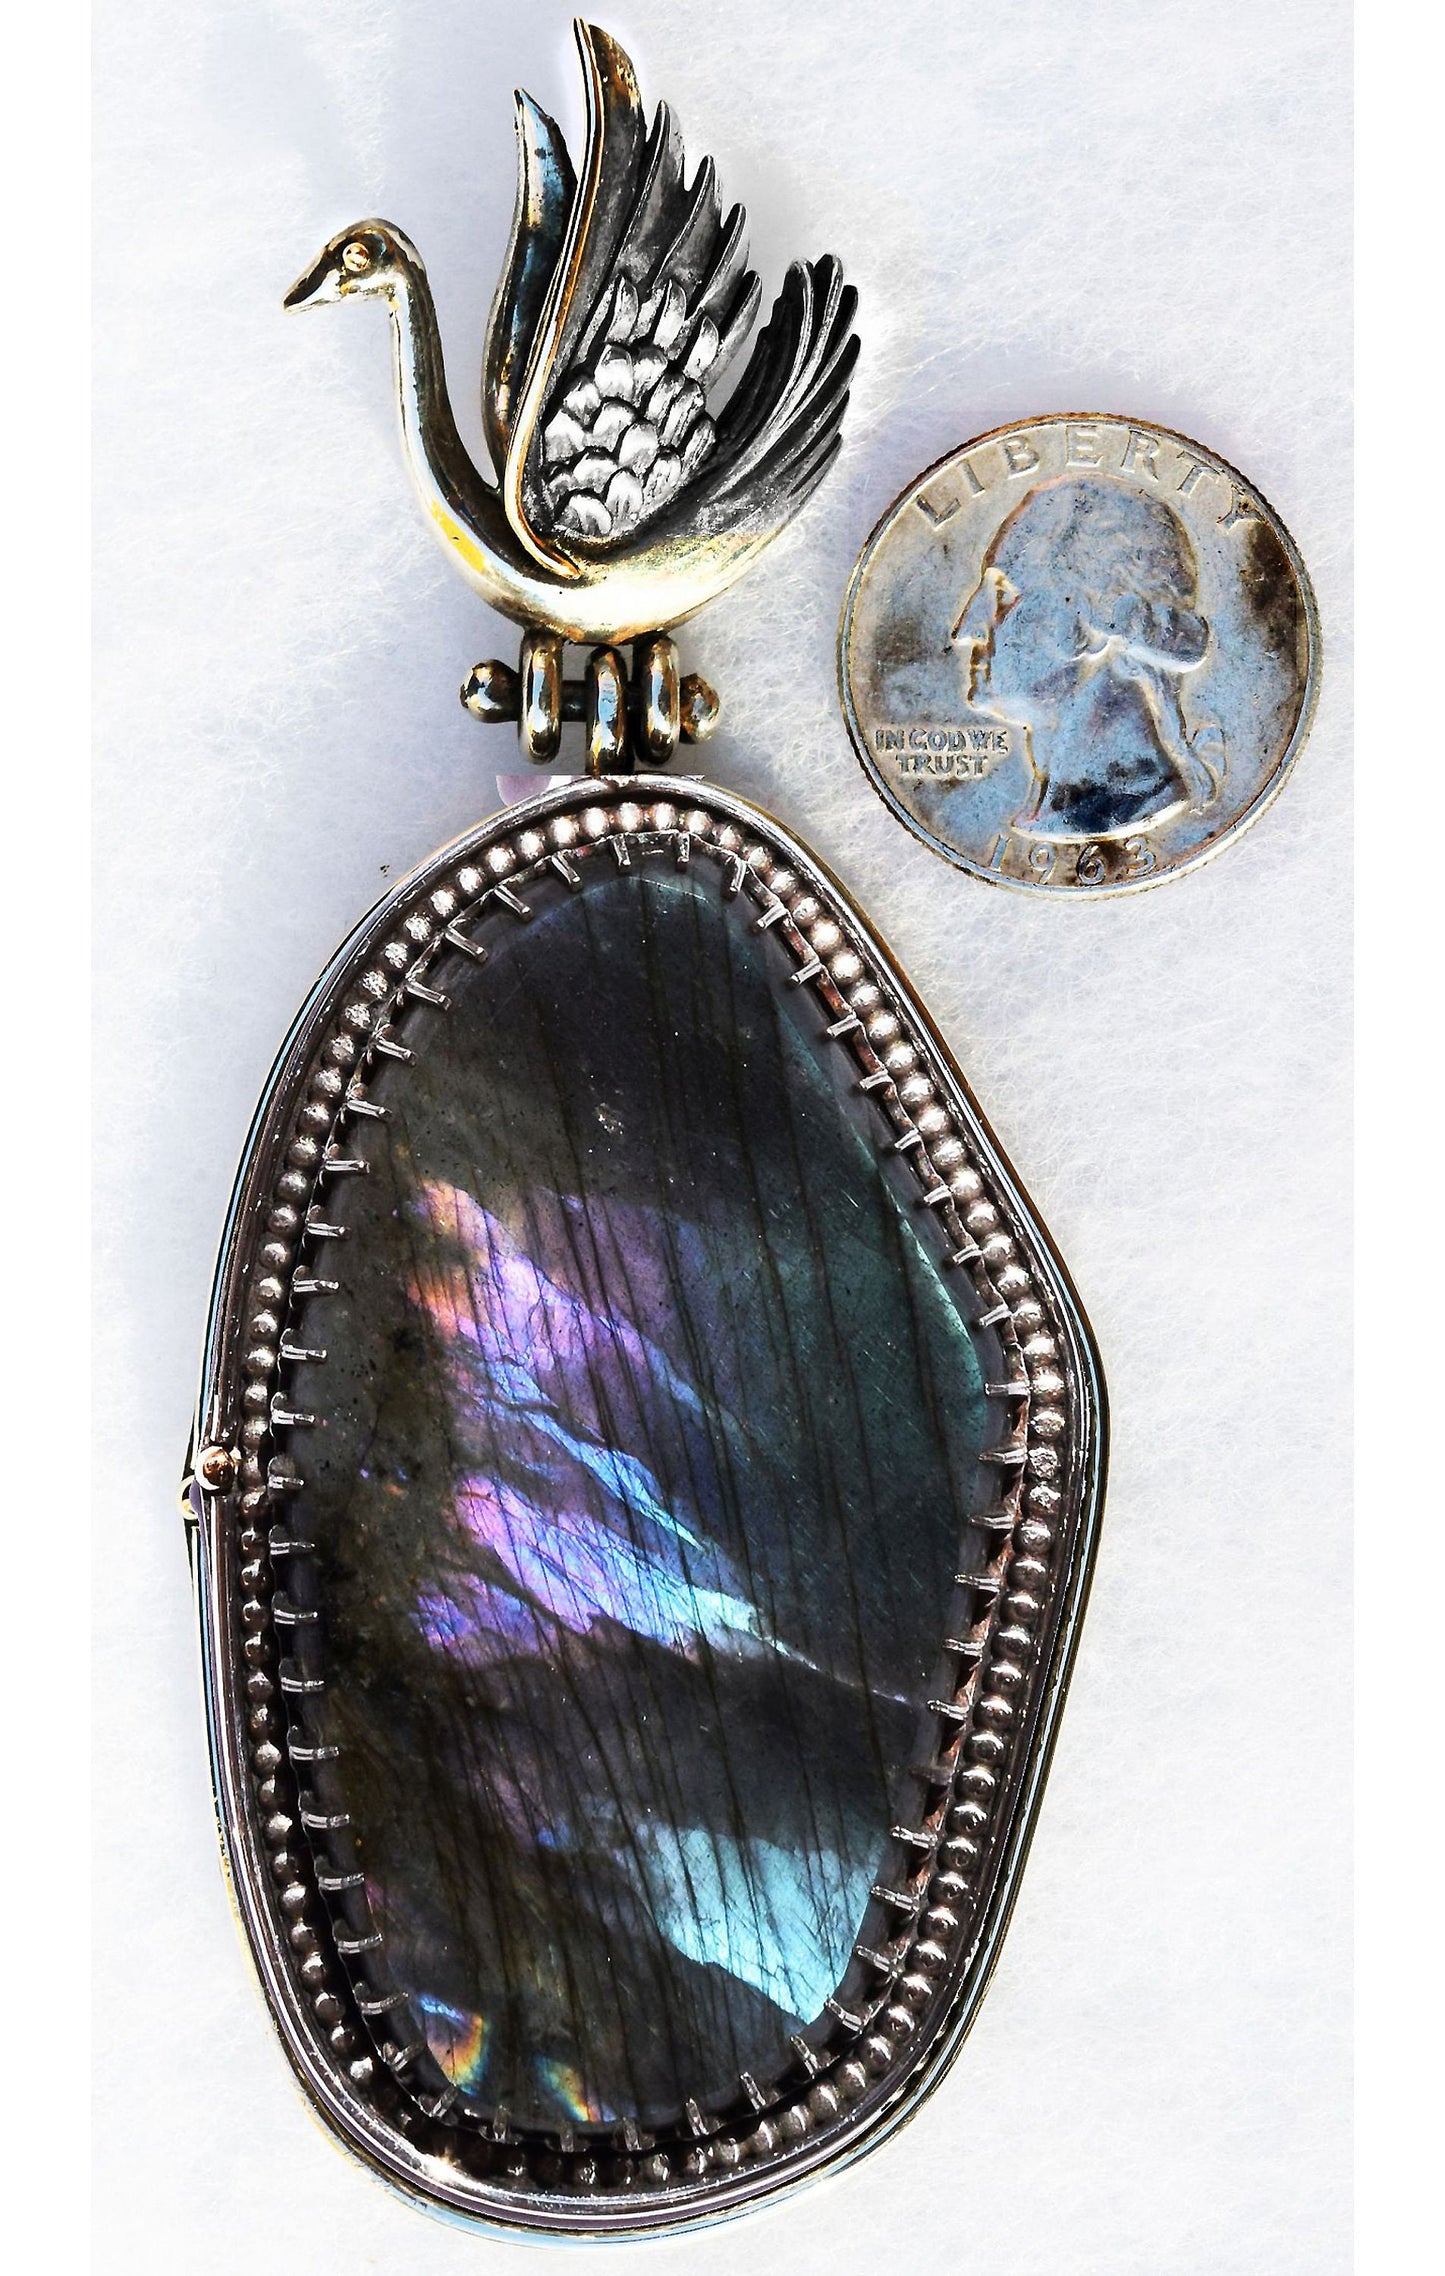 Huge, stunning PURPLE Labradorite set in hand made sterling Silver mounting with 14K gold accents!